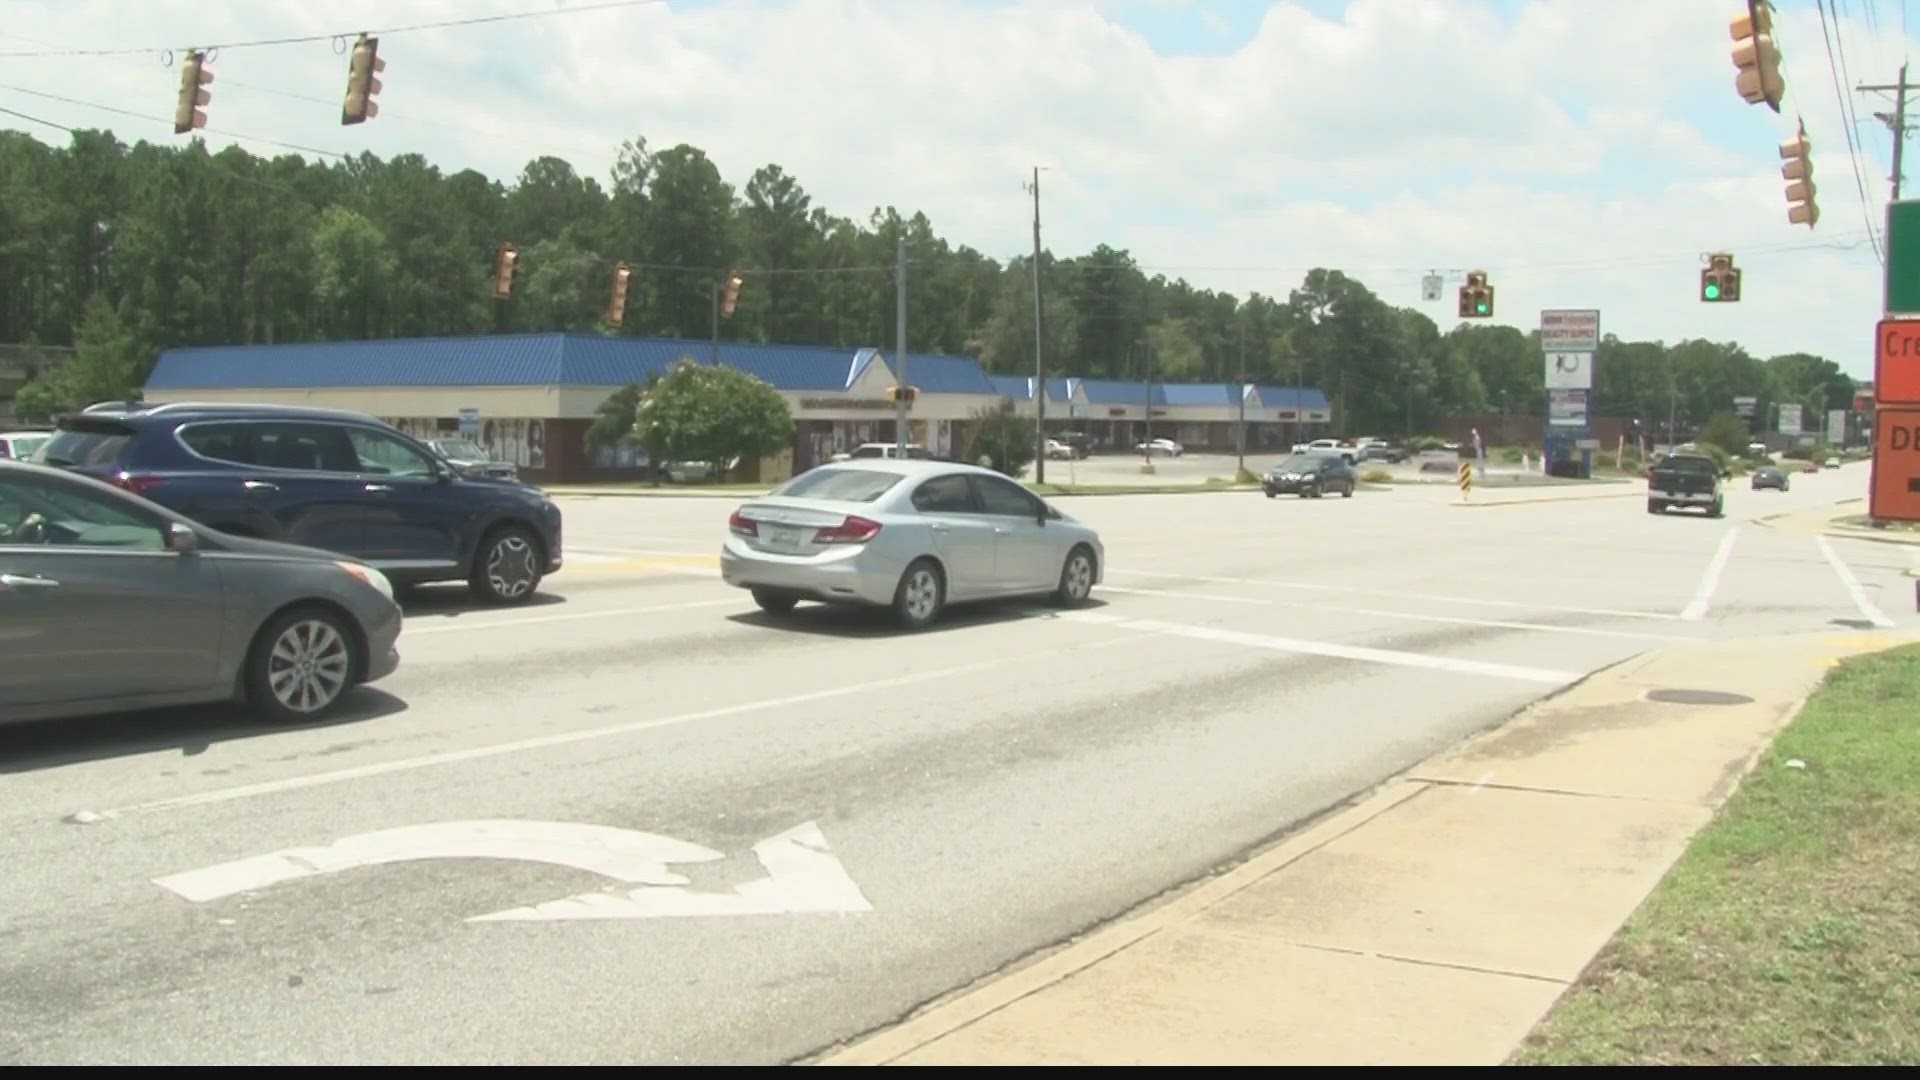 The South Carolina Highway Patrol (SCHP) is investigating a deadly hit-and-run incident that occurred early Monday morning in northeast Columbia.